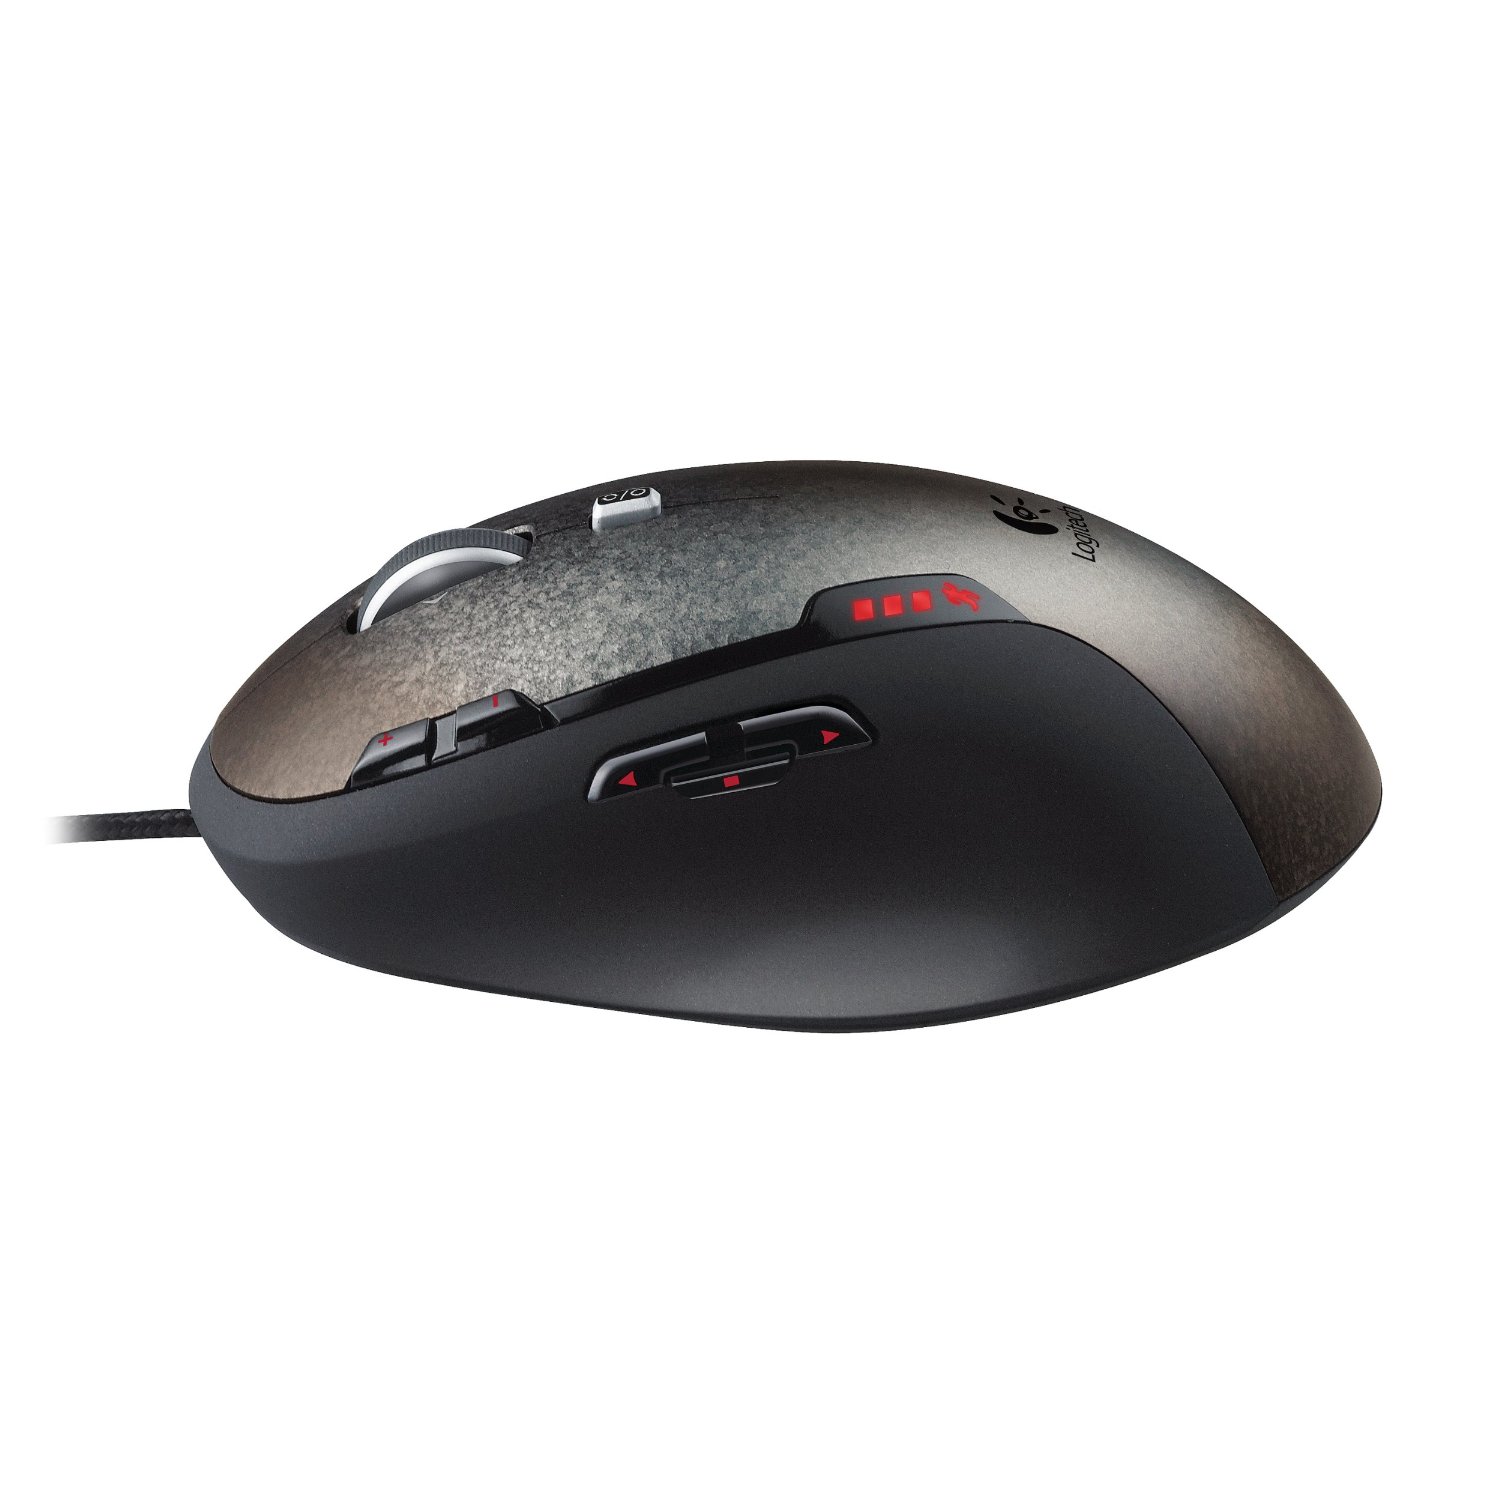 http://thetechjournal.com/wp-content/uploads/images/1110/1317524254-logitech-g500-programmable-gaming-mouse-11.jpg